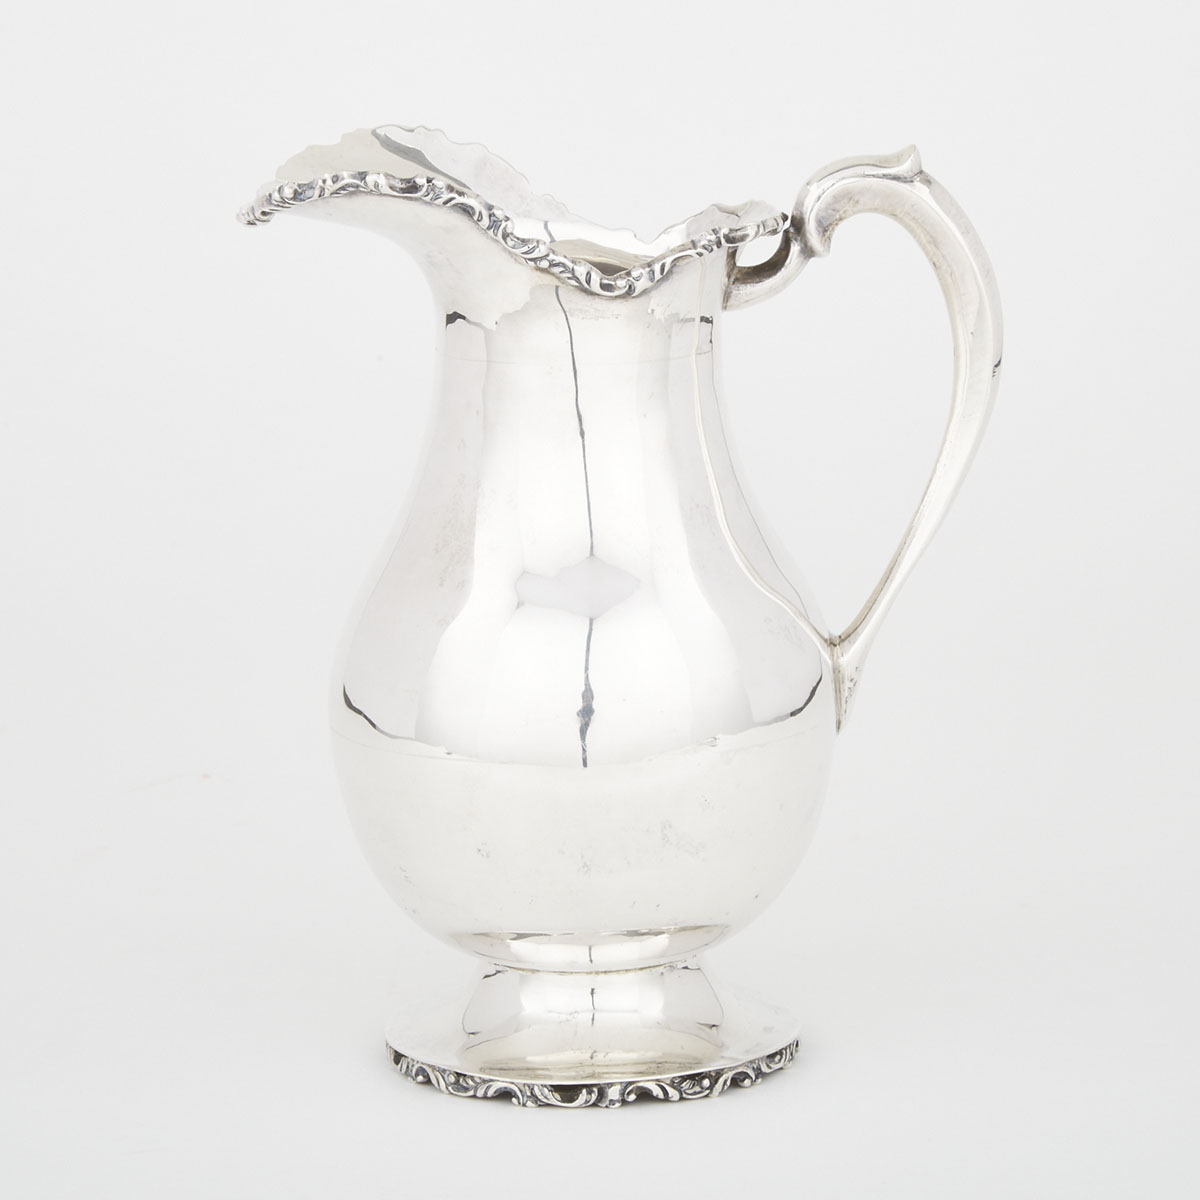 Mexican Silver Pitcher, Juvento Lopez Reyes, Mexico City, 20th century